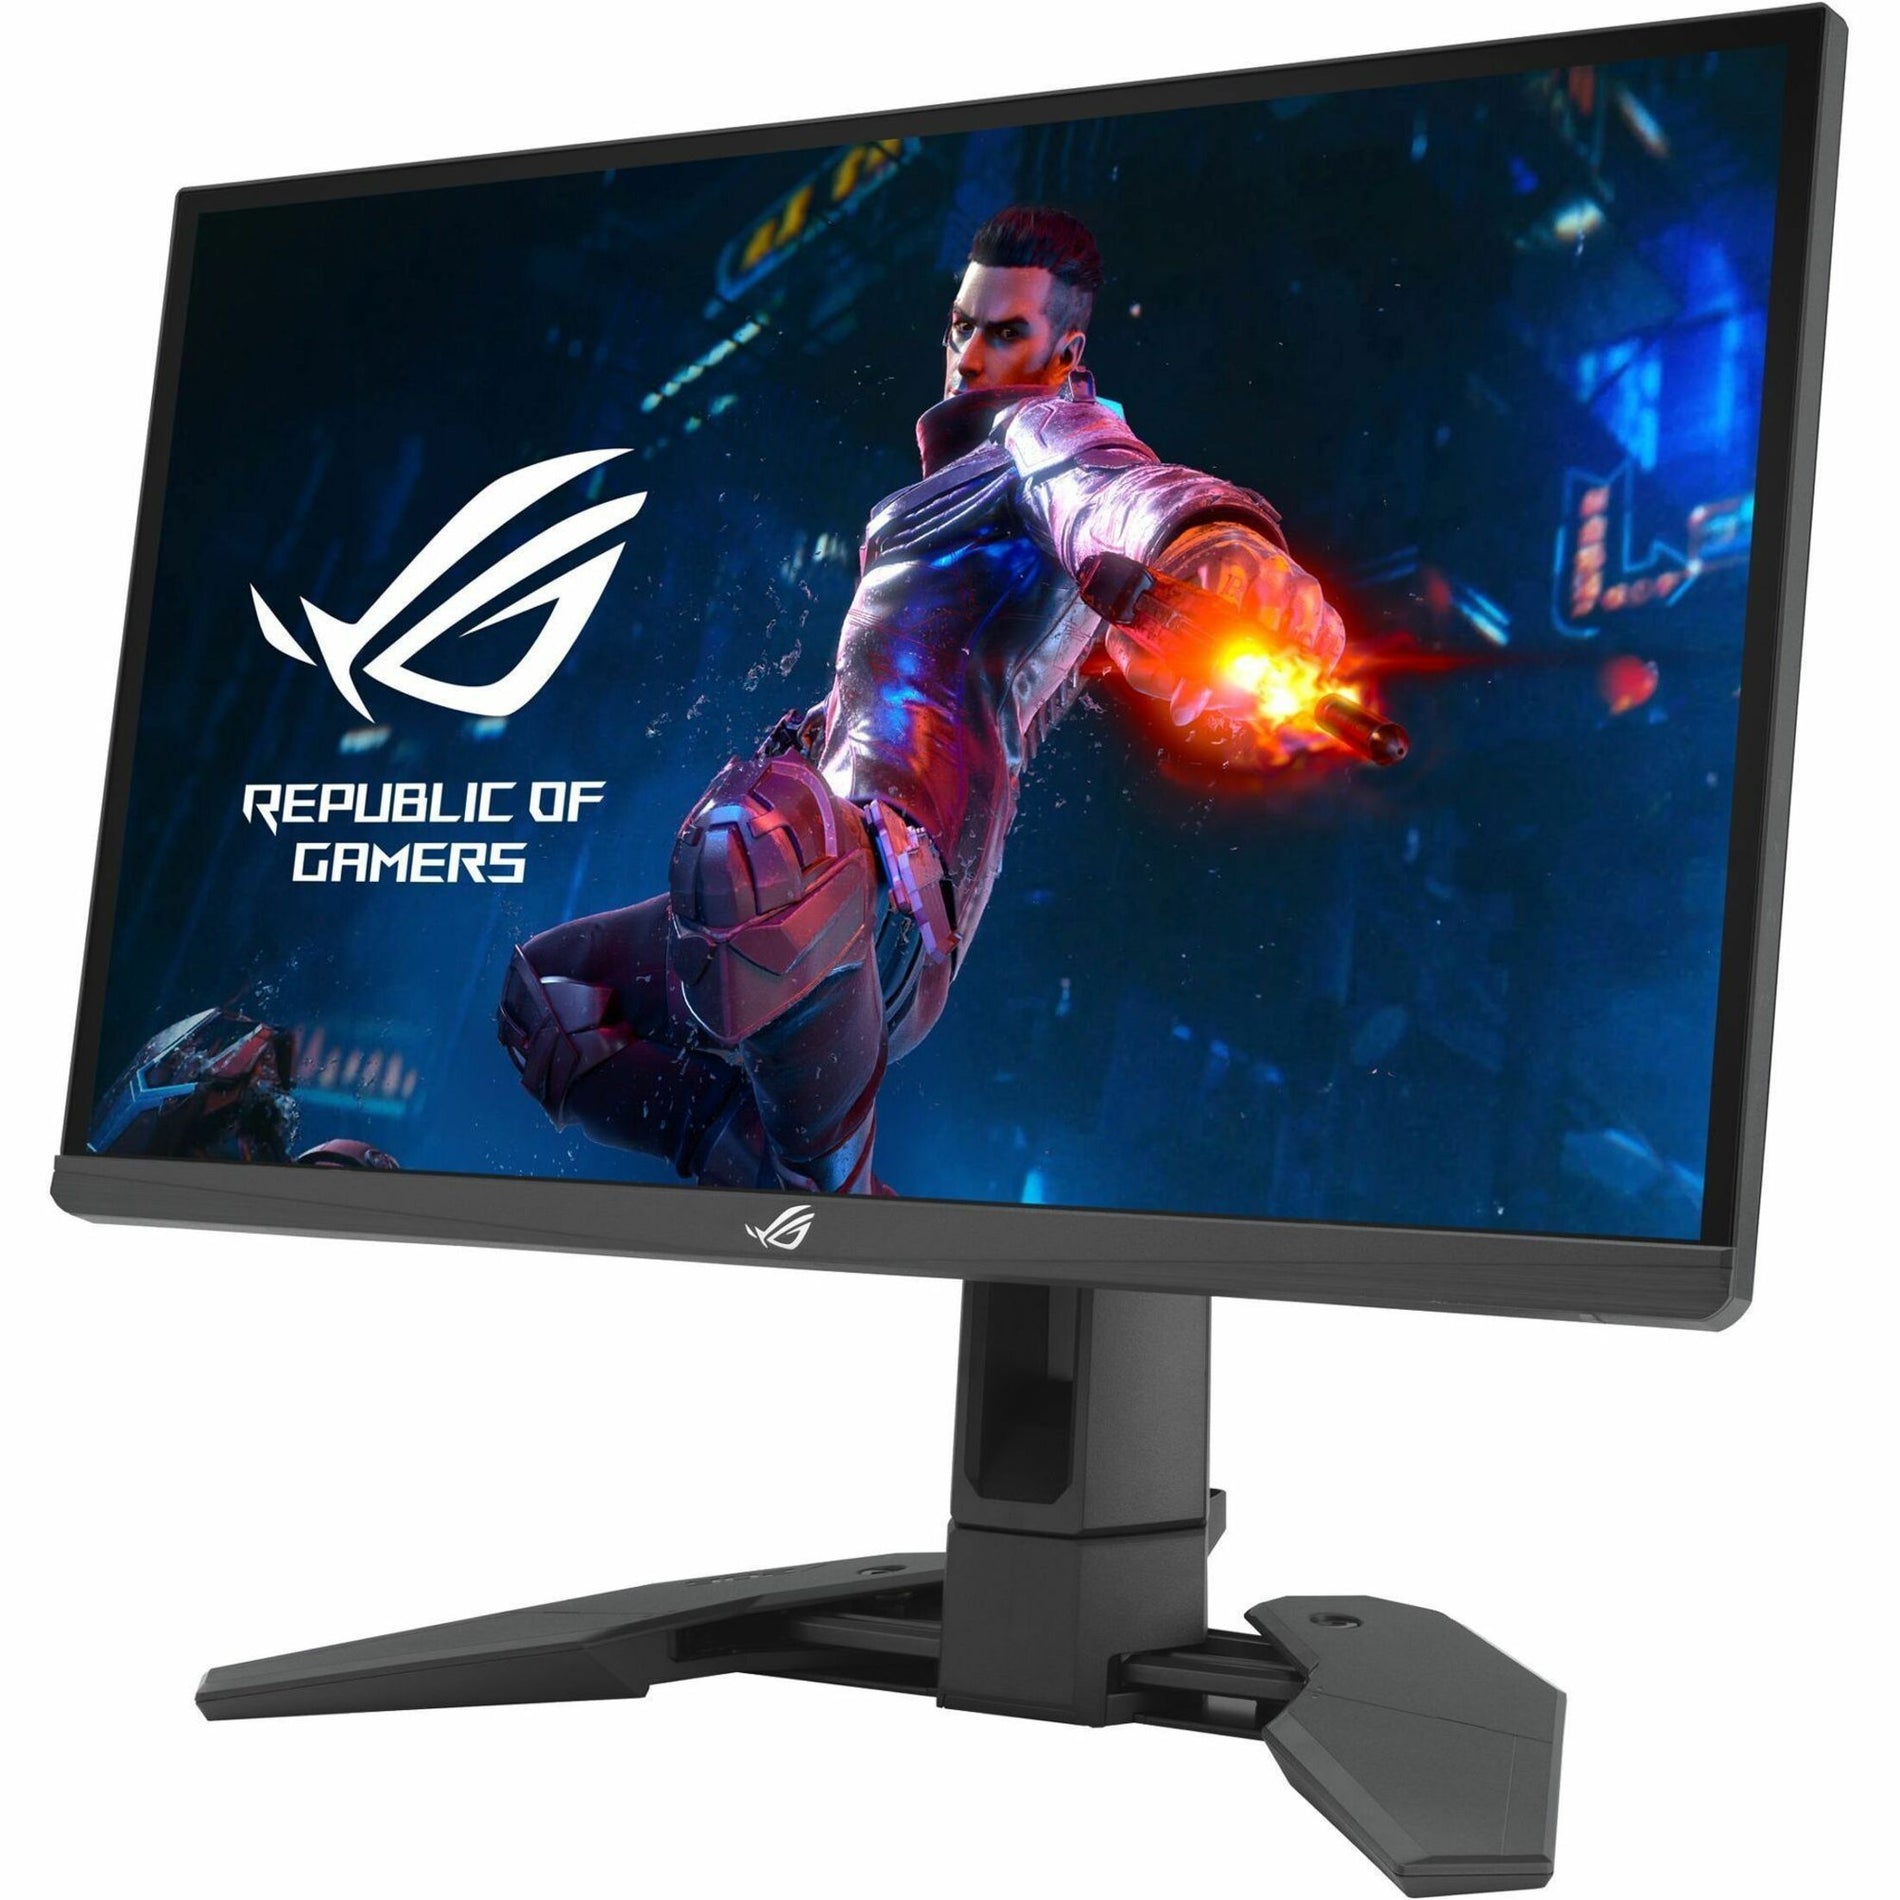 Which monitor for my rig? 24-inch 1080p 144Hz or 27-inch 1440p 144Hz?